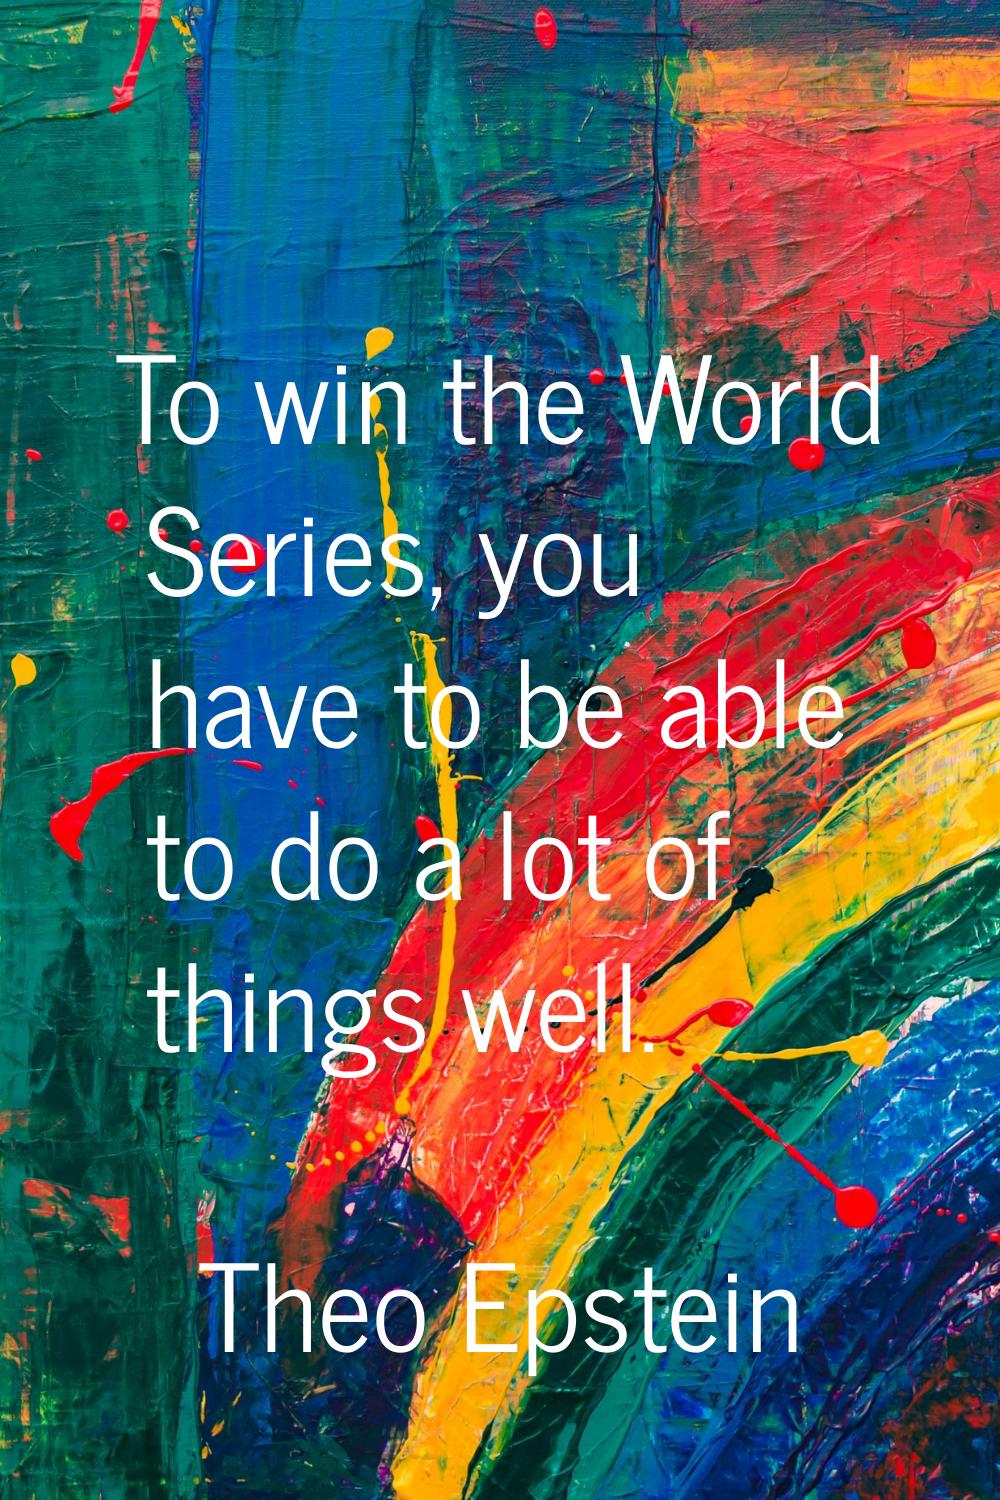 To win the World Series, you have to be able to do a lot of things well.